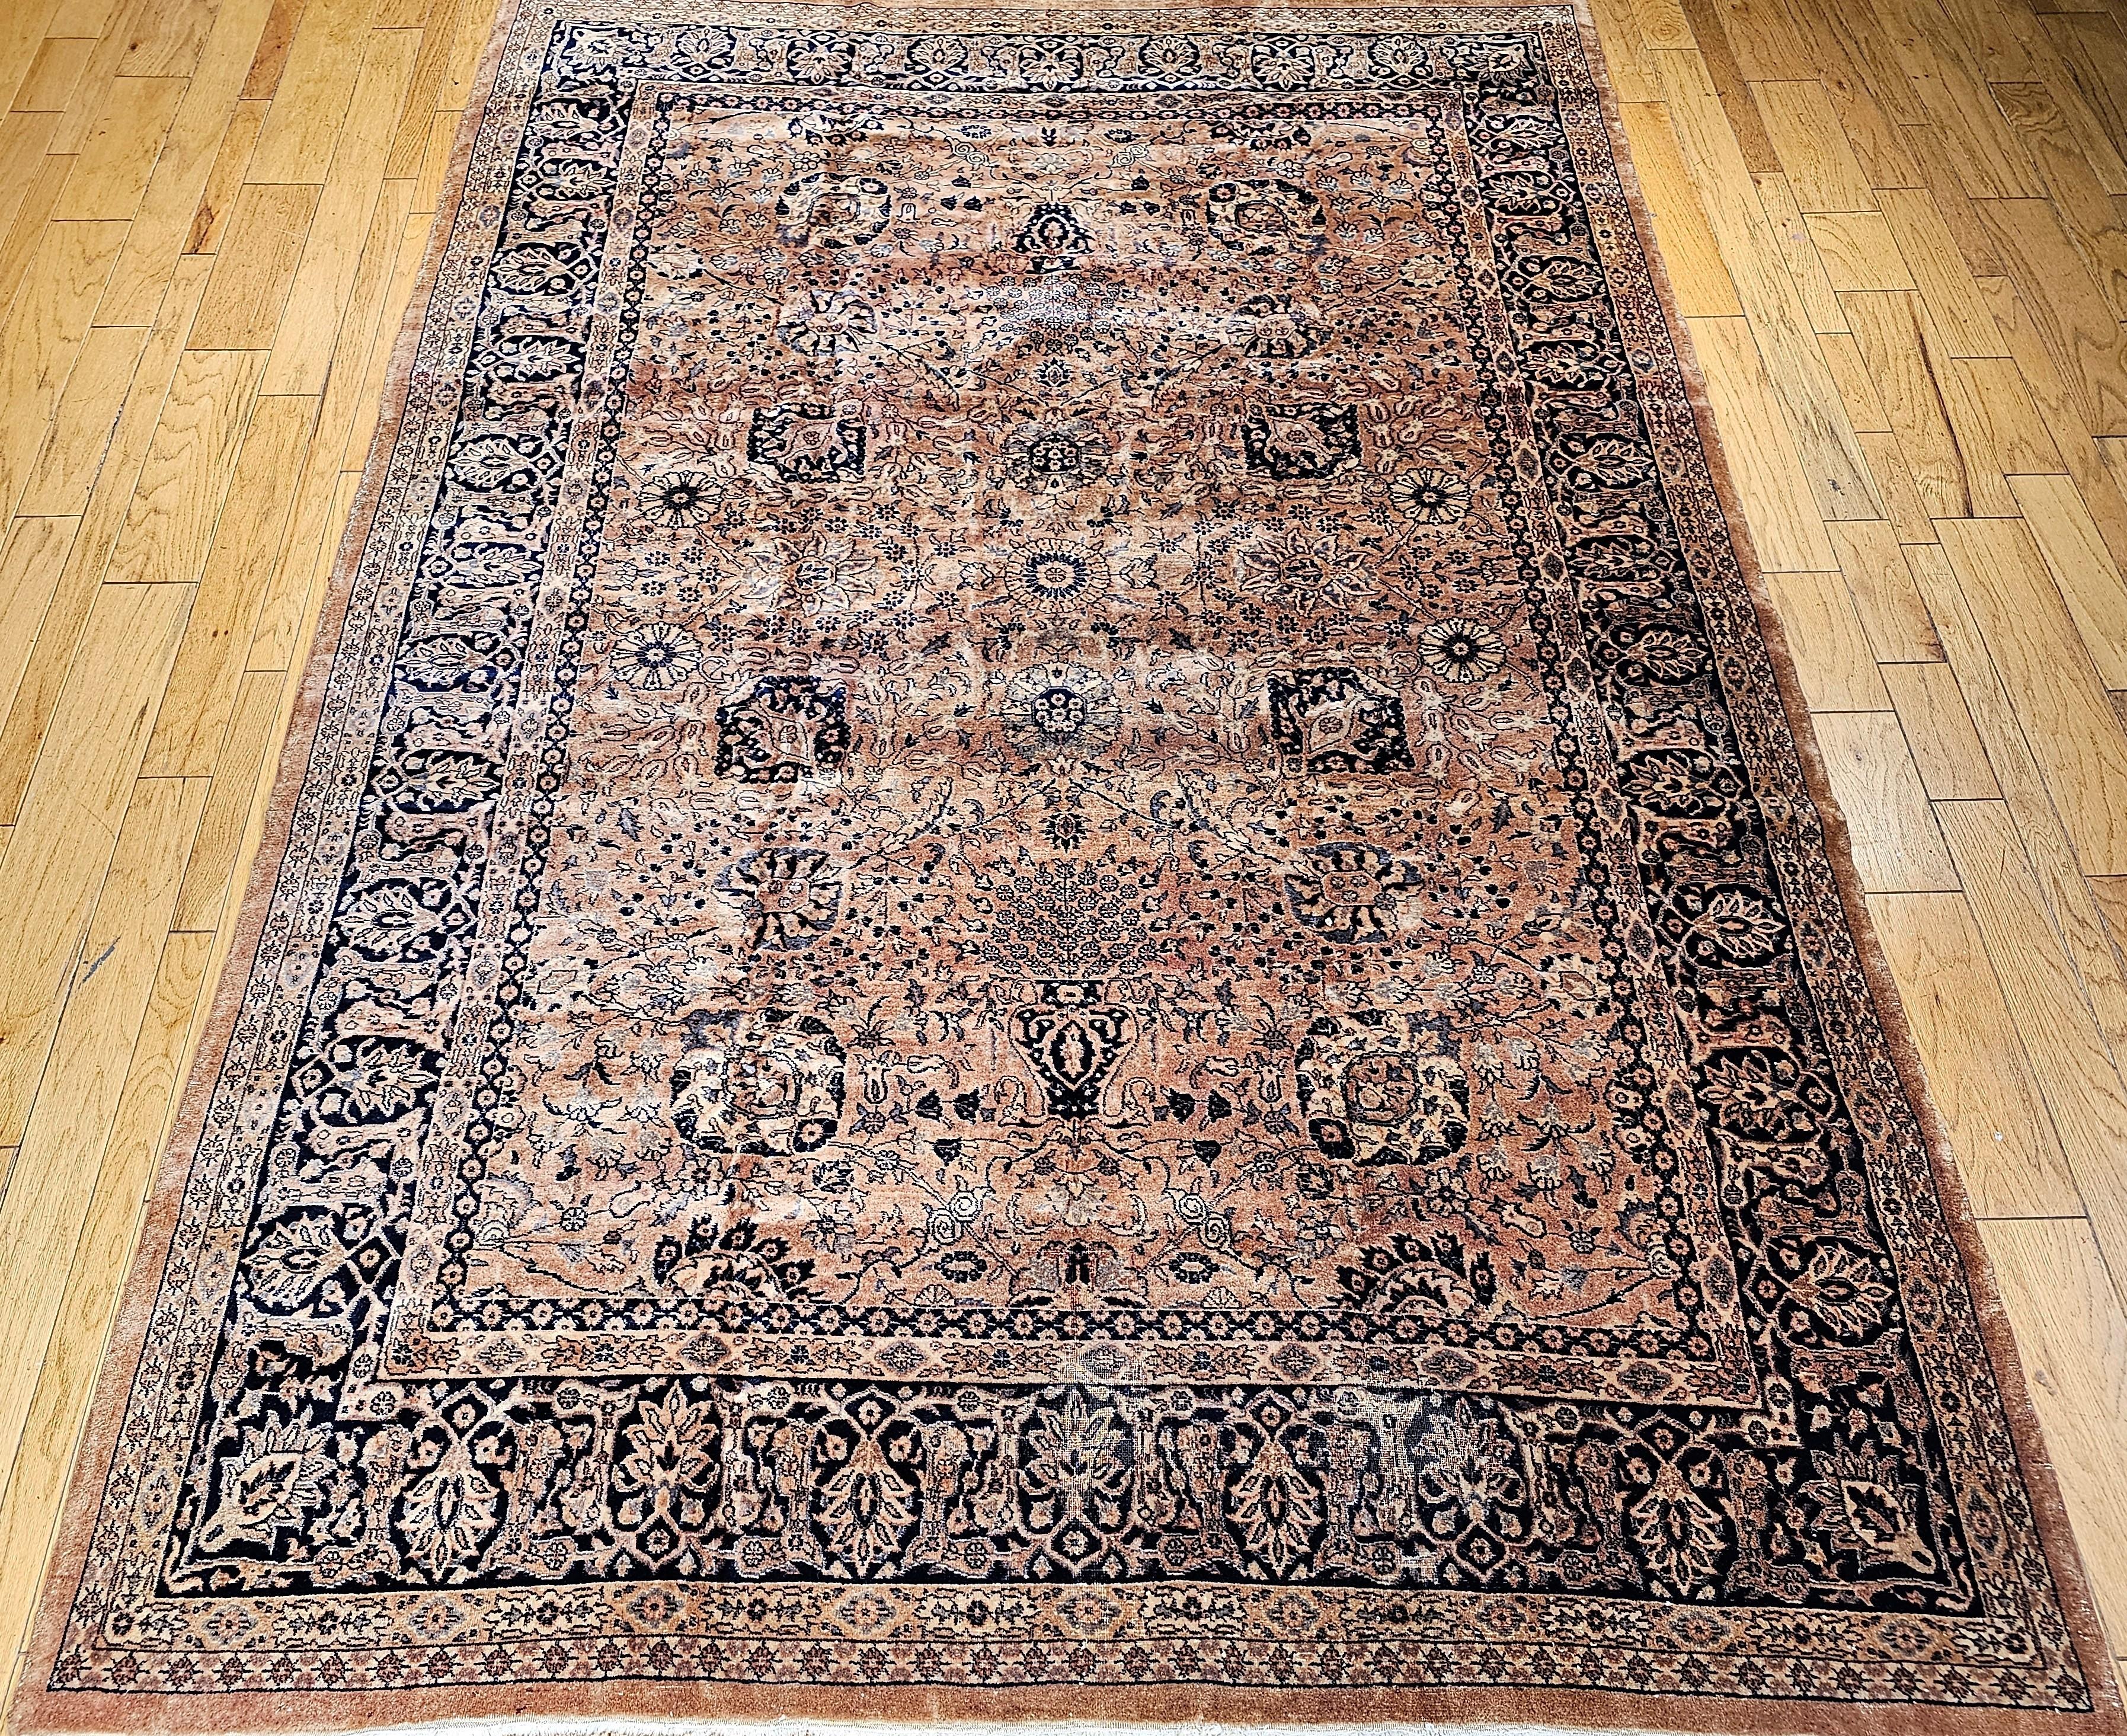 Vintage room-size Kerman Vase carpet from the mid-1900s.  The rug has a camelhair or apricot color background with an all-over trellis of leafy vines, palmettes, and vases issuing floral sprays within a black color flowerhead and palmette border.